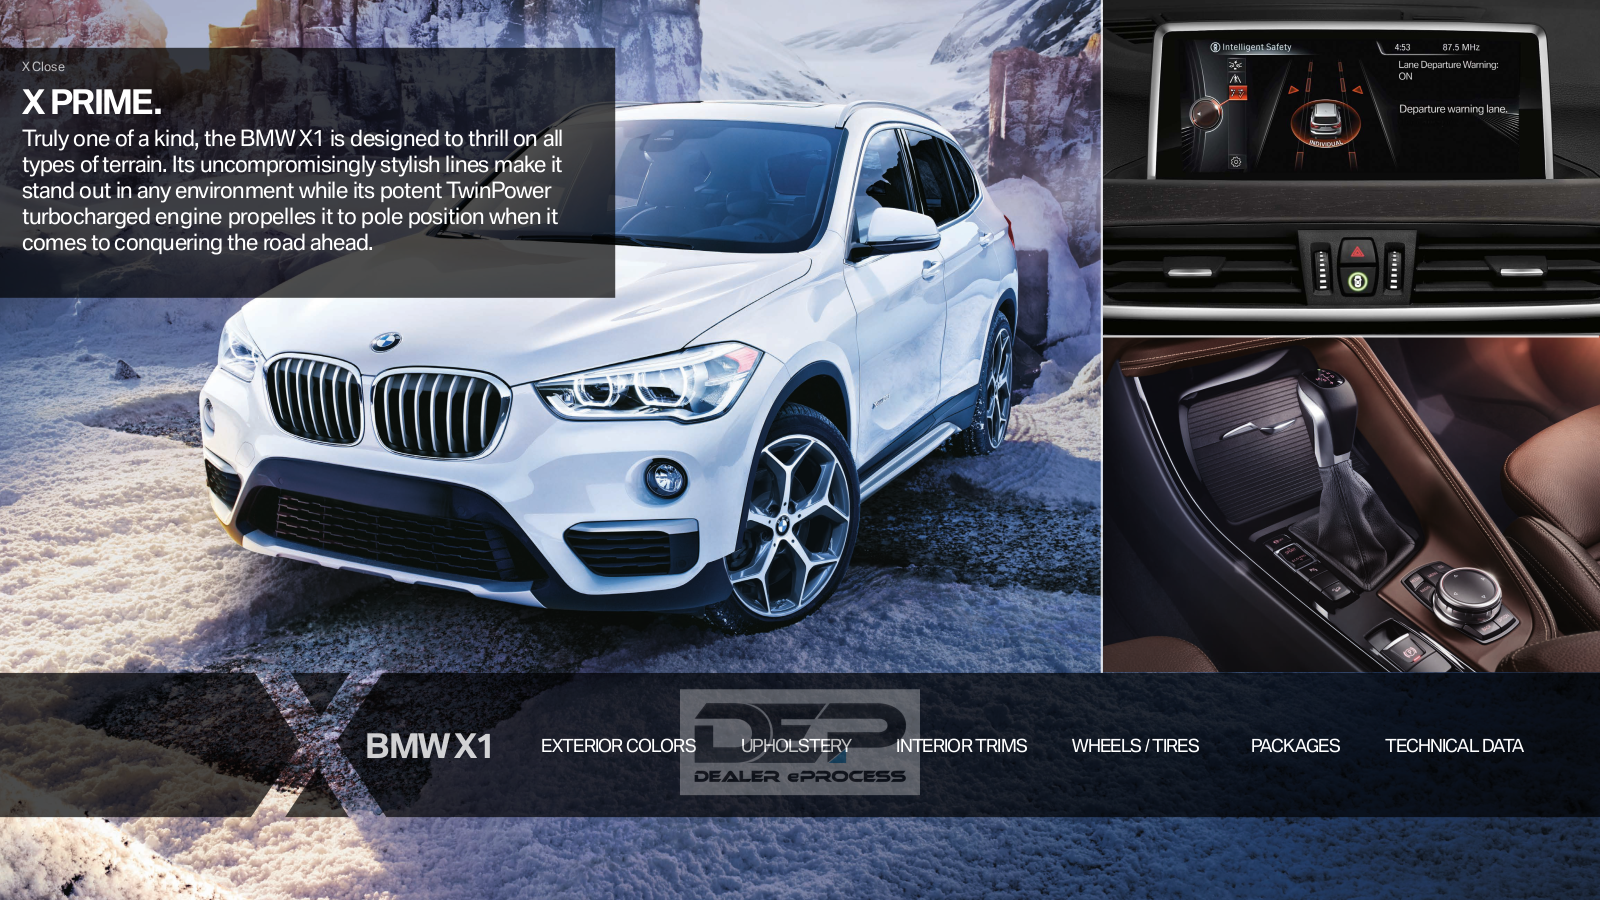 BMW X1 2017 Owner's Manual